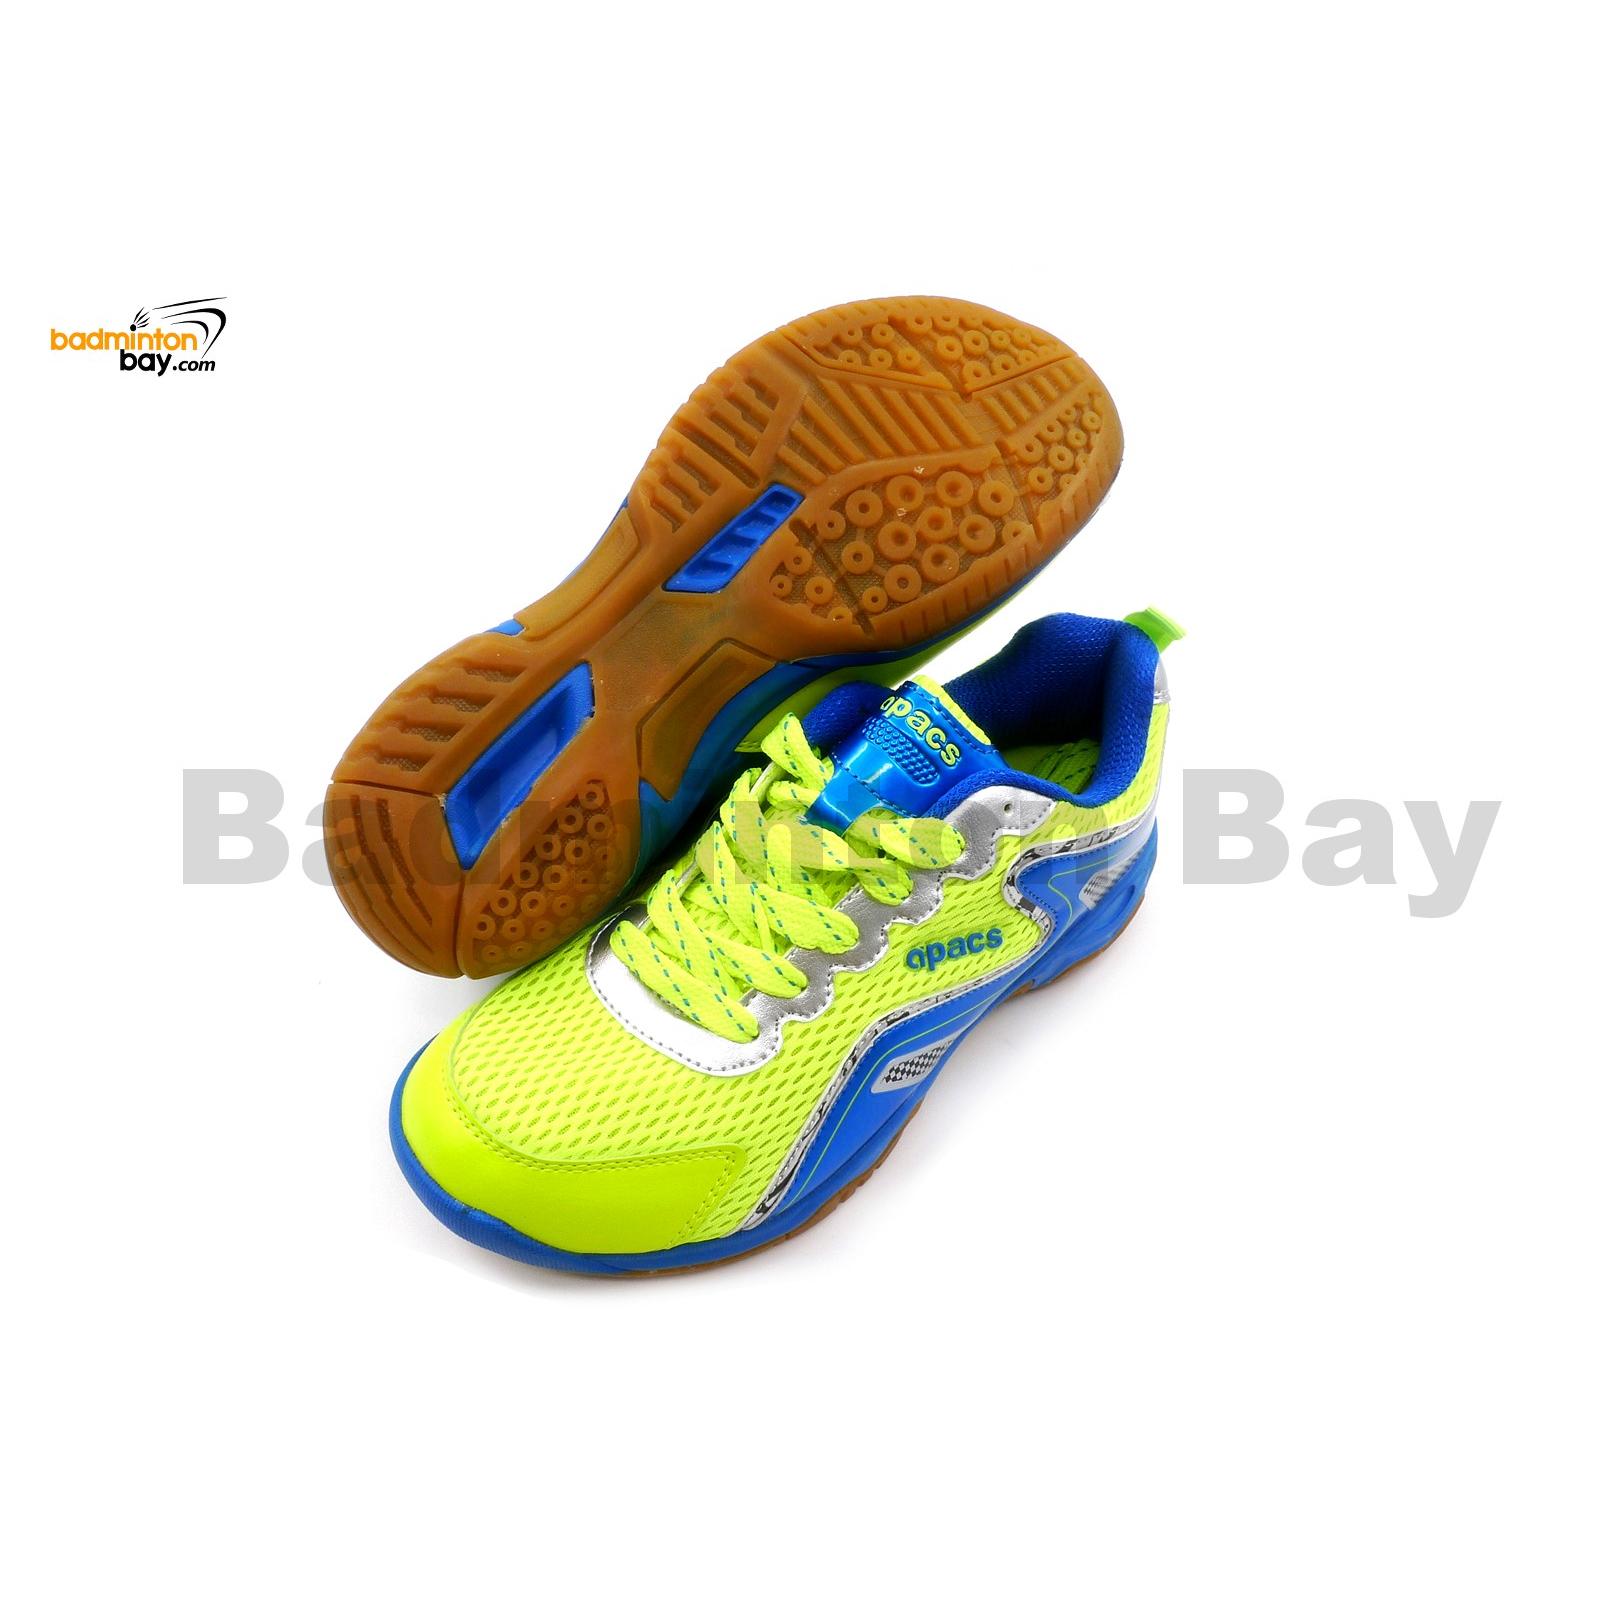 Apacs Cushion Power 077 Neon Green Blue Badminton Shoes With Improved ...